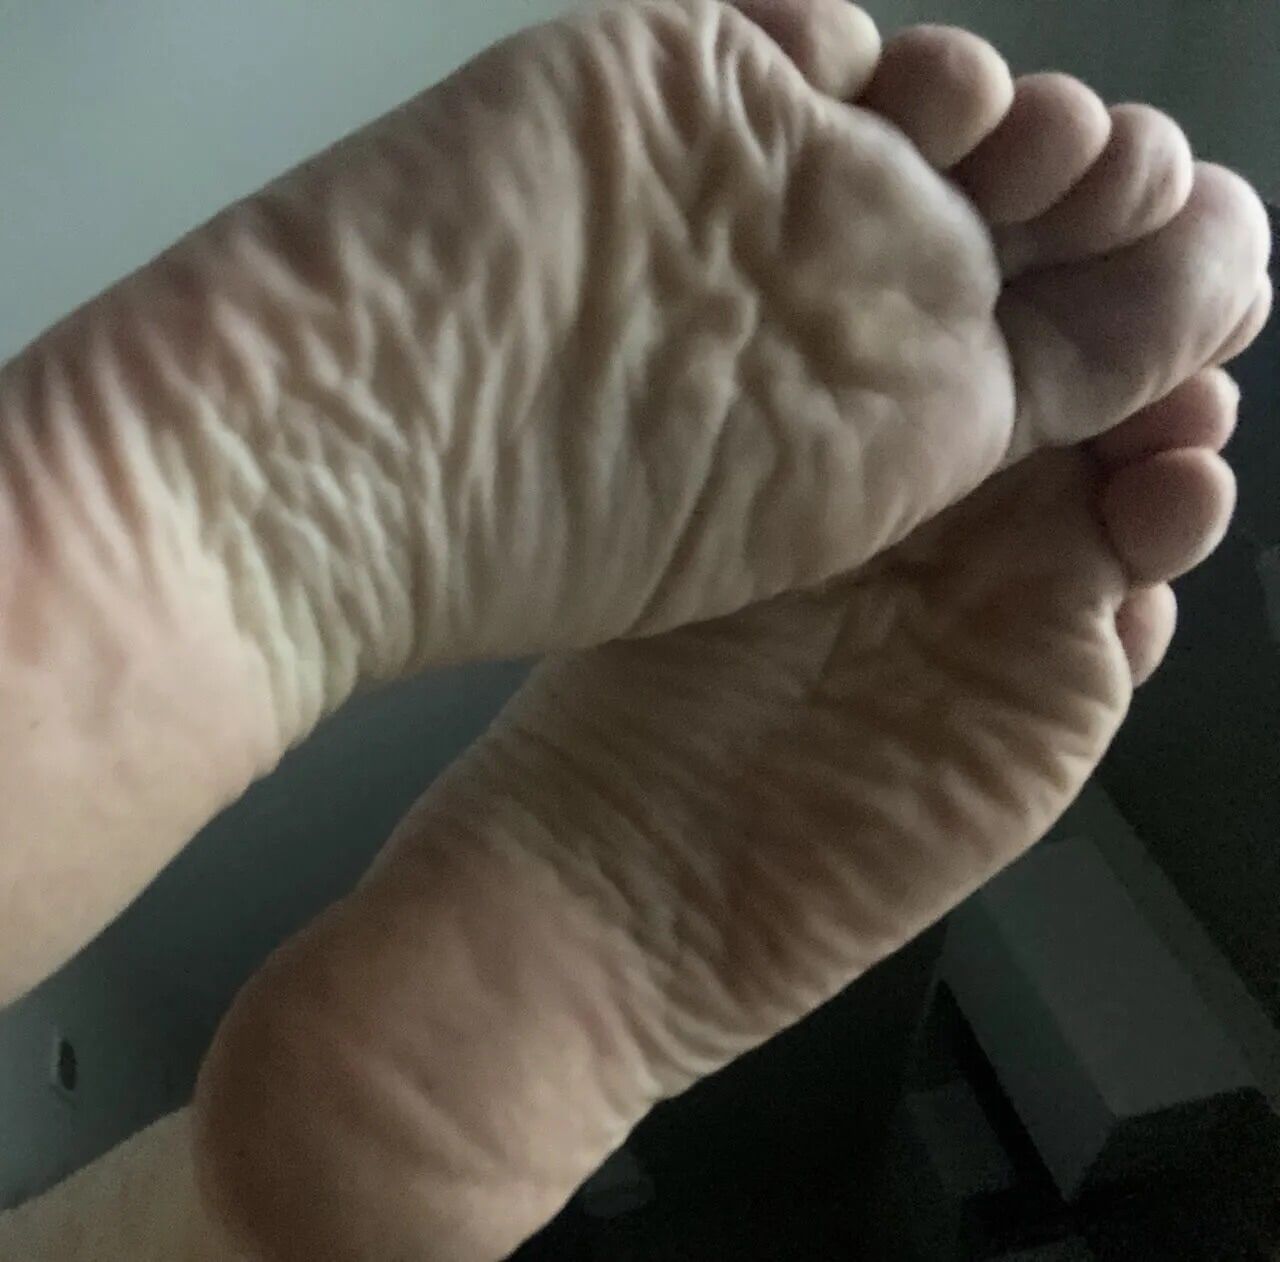 My cock and feet #12